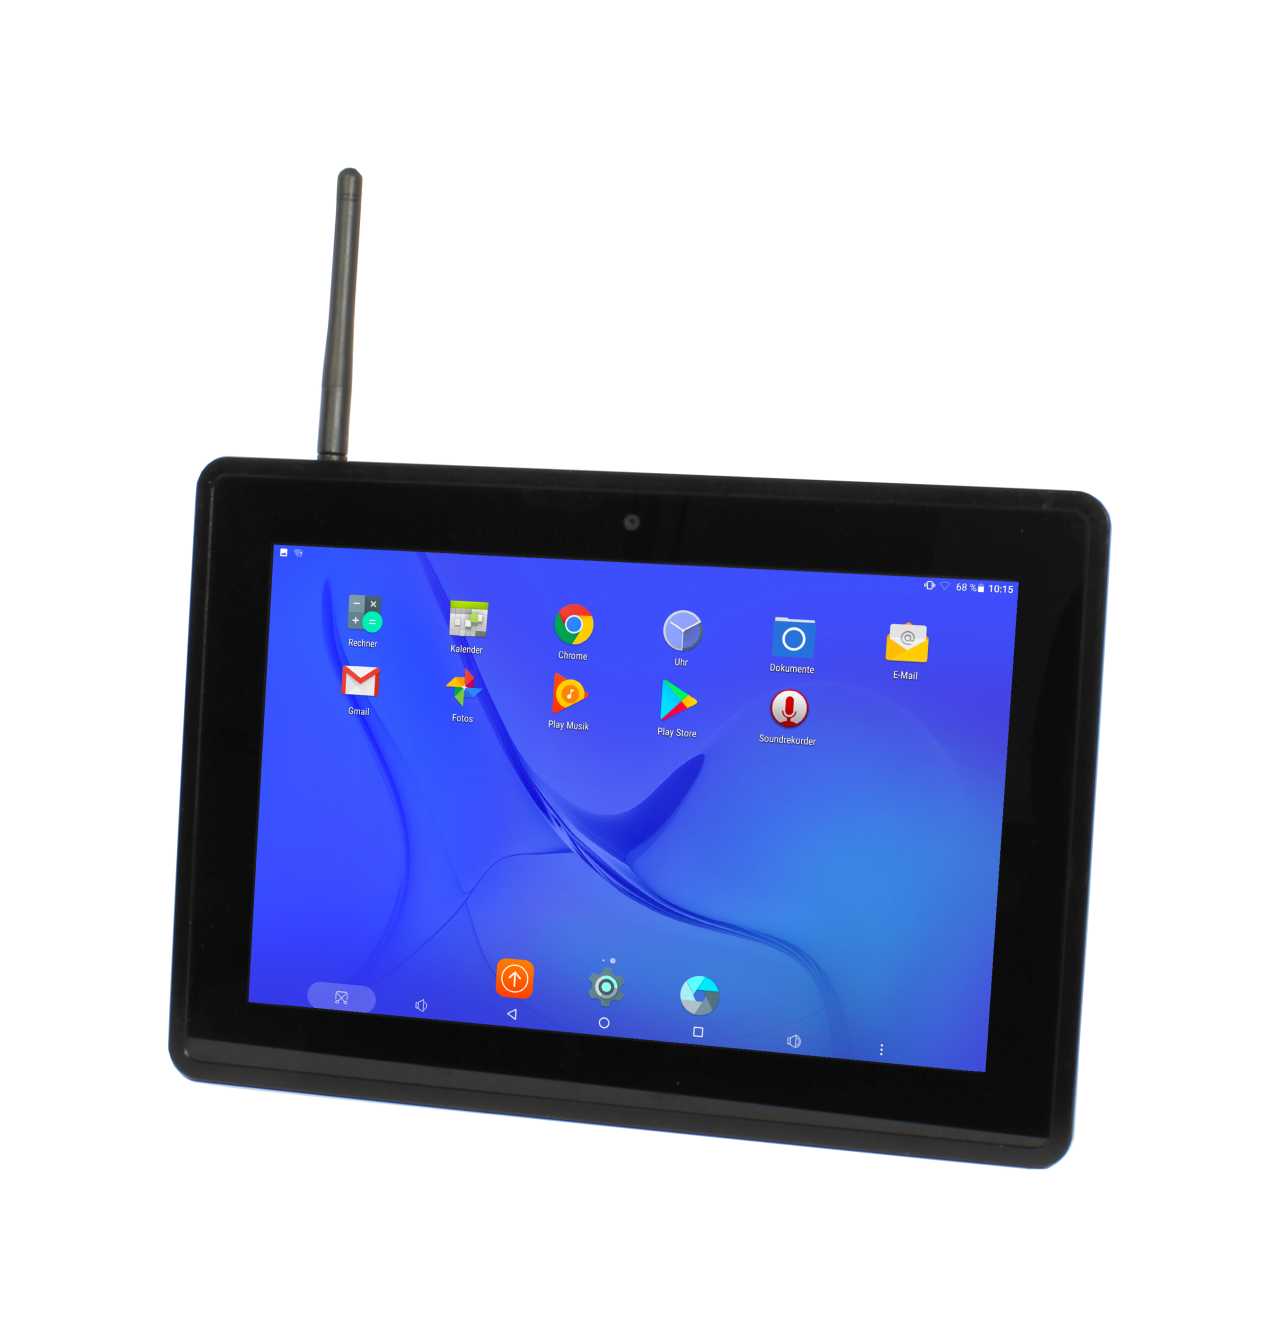 ALLNET Professionell Touch Display Tablet 10 Zoll Metal Housing, PoE mit 2GB/16GB, RK3399 Android 7.1, LTE fähig